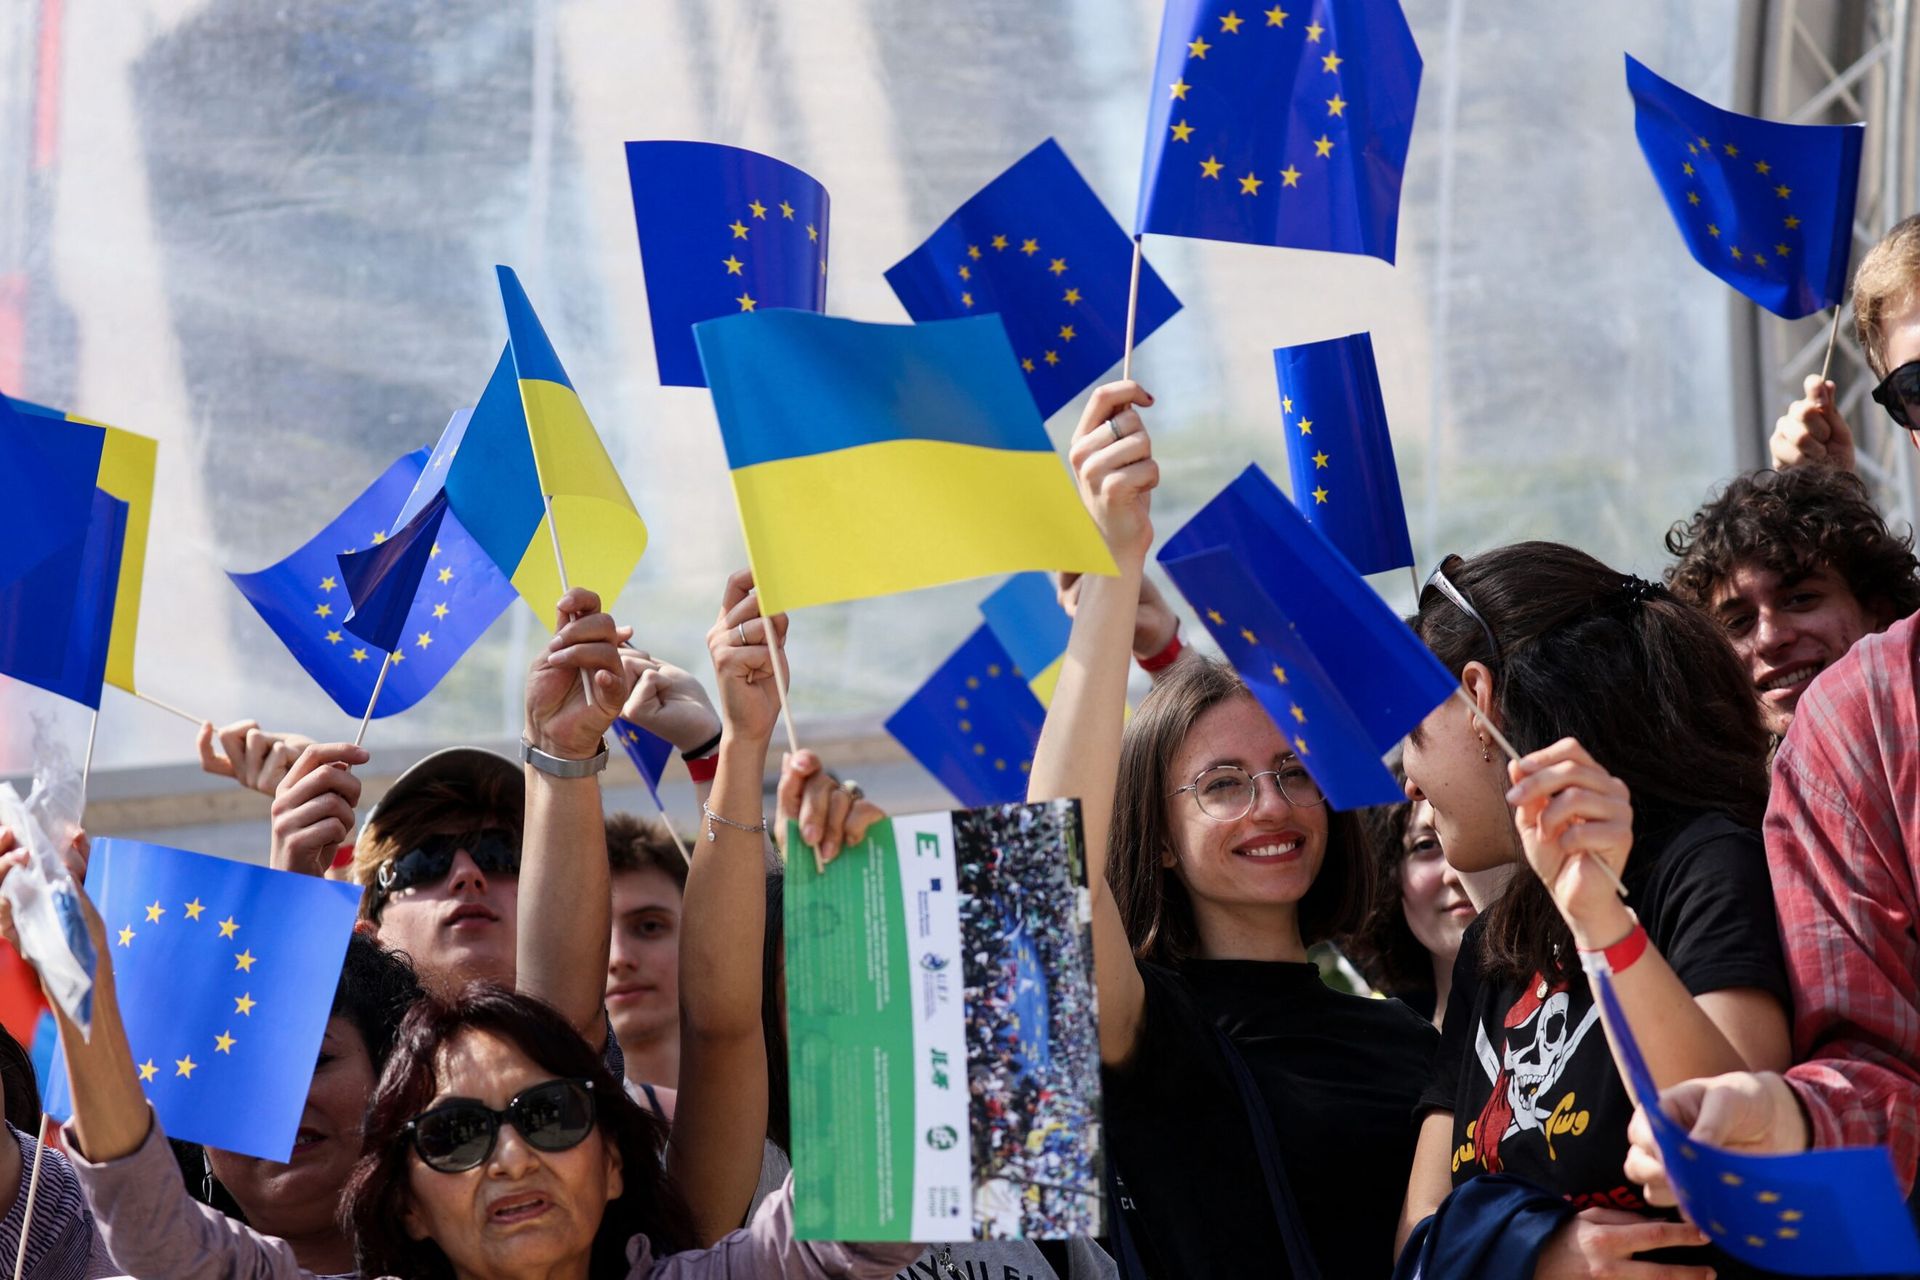 Most Europeans support aid to Ukraine, poll finds